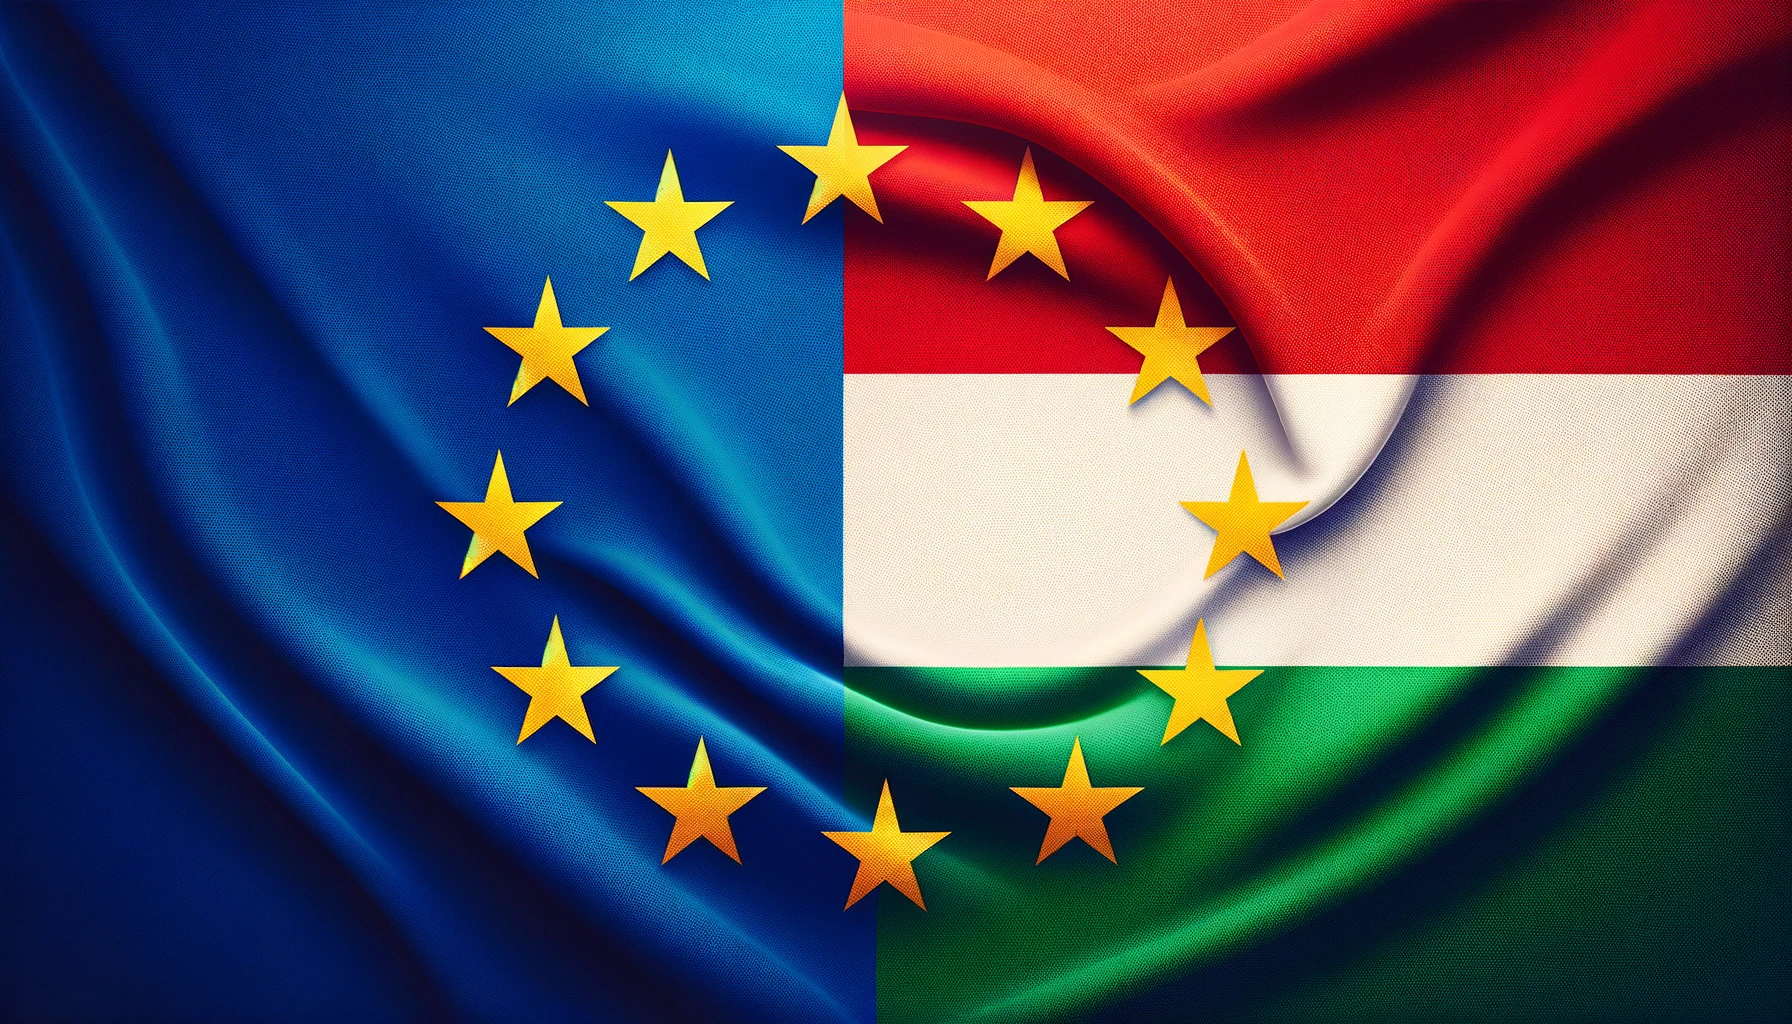 dall_e_2024-05-01_12_12_02_a_wide_flag_split_vertically_down_the_middle_with_the_left_half_featuring_the_european_union_flag_design_a_circle_of_twelve_golden_stars_on_a_blue_b.webp